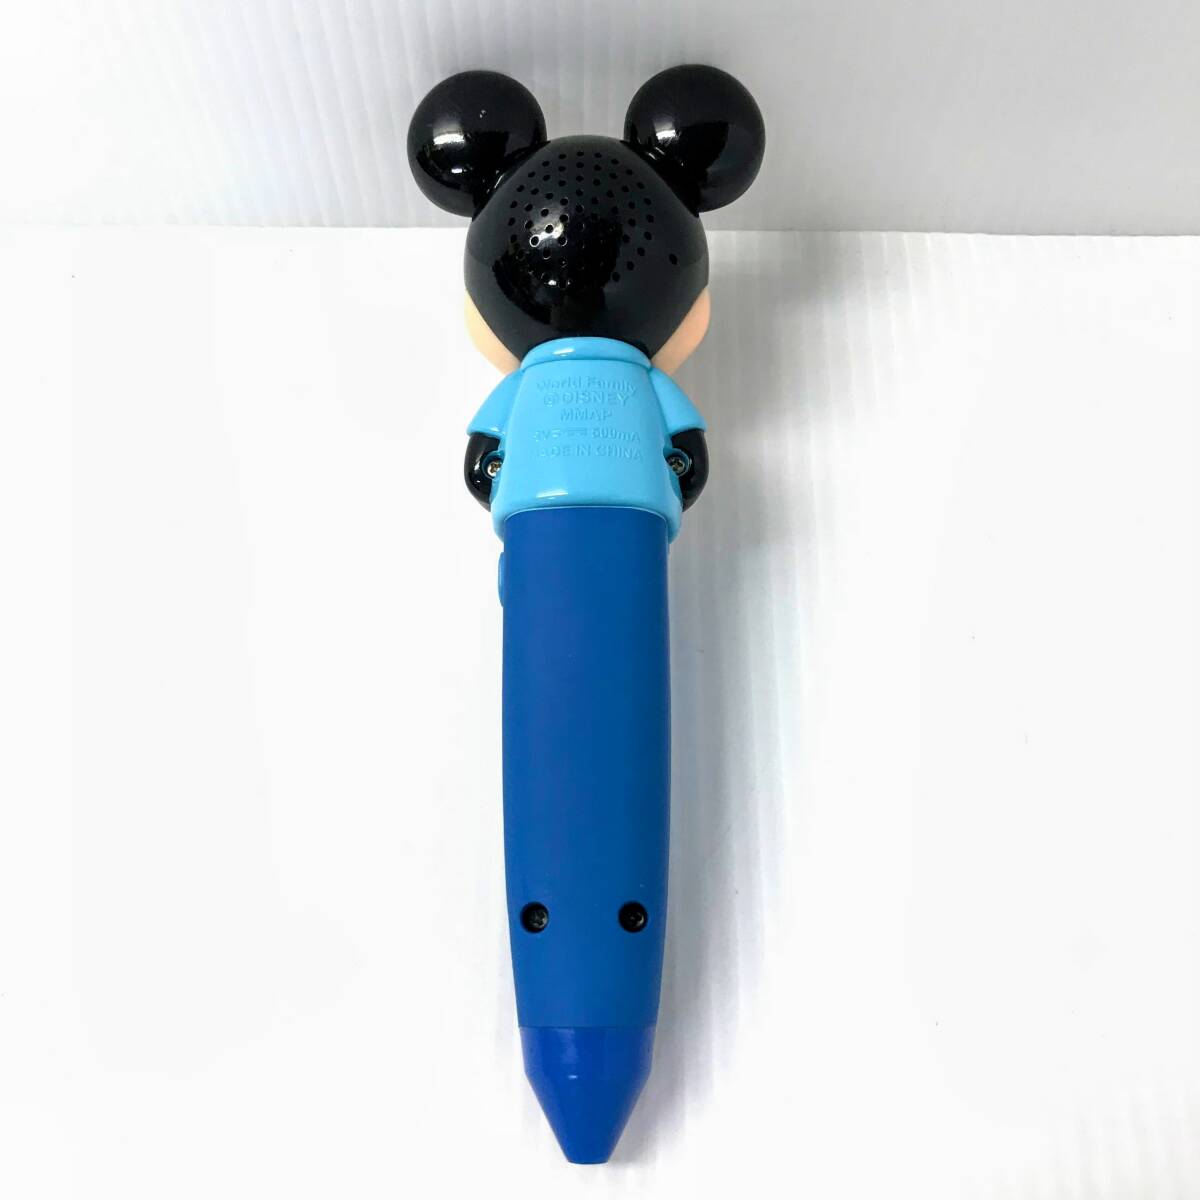 1 jpy ~ Magic pen adventure 2020 year buy condition excellent a-274 Disney English system DWE world Family 